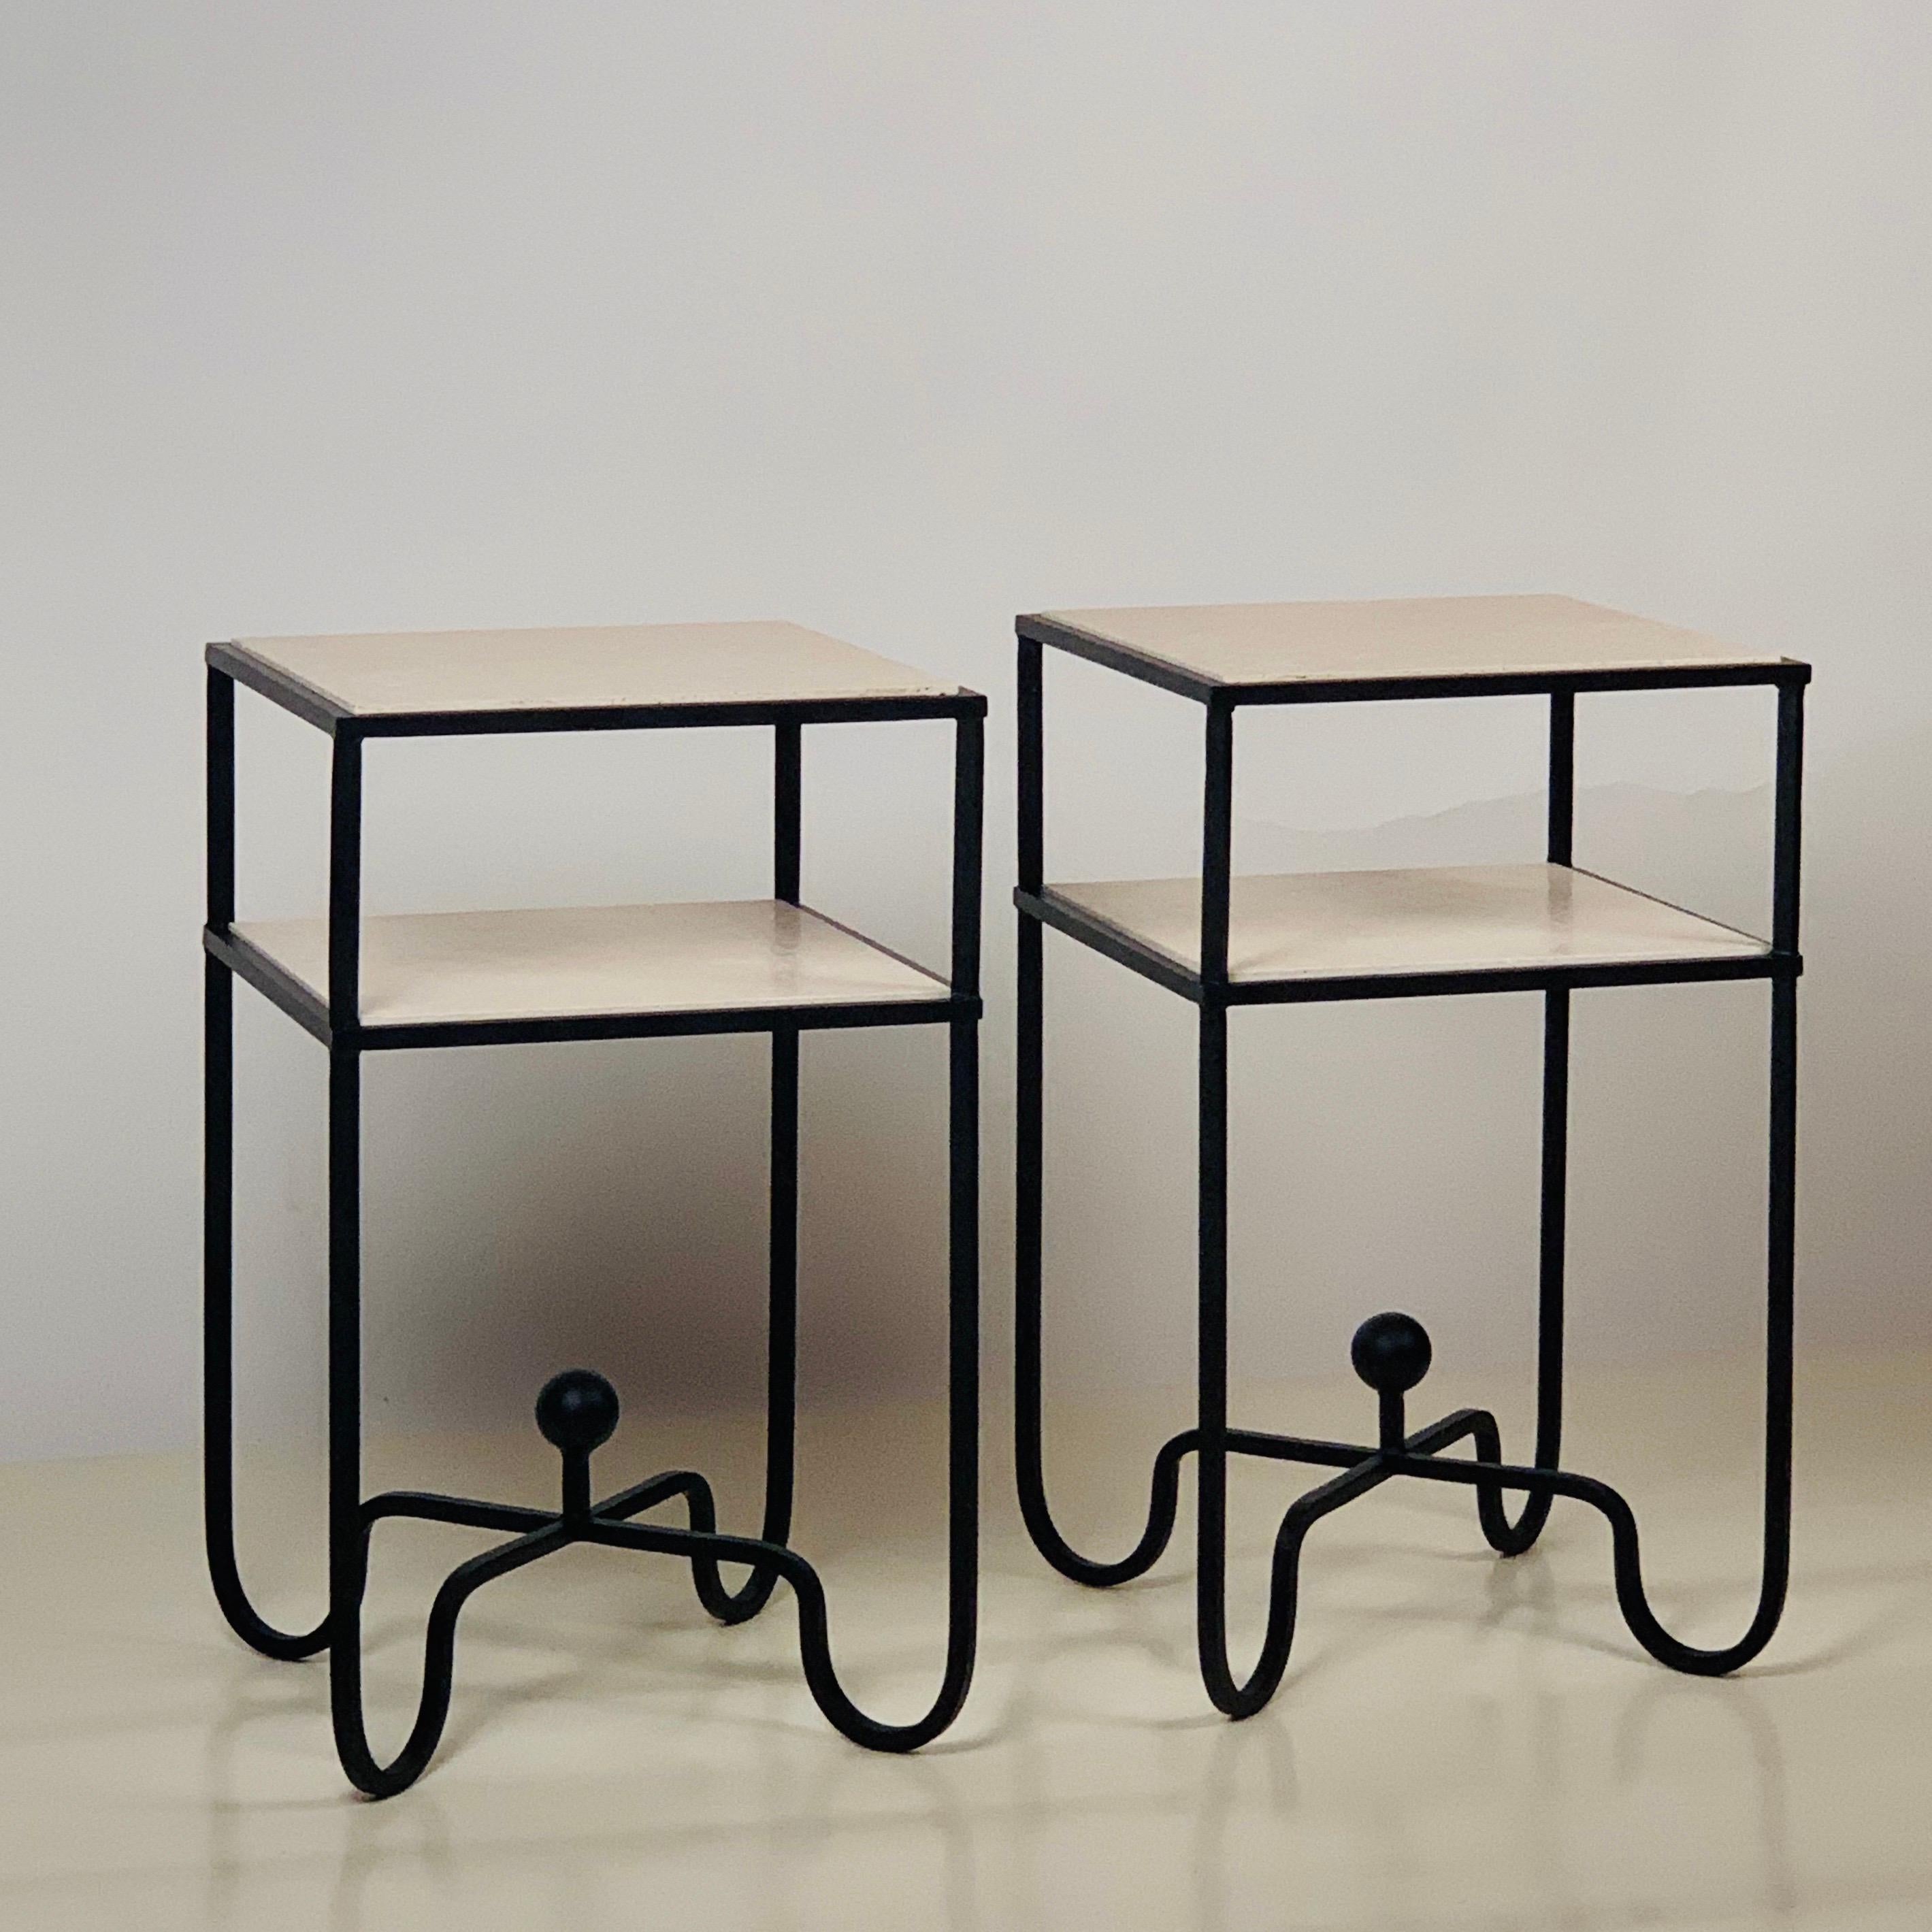 Pair of 2-tier 'Entretoise' side tables by Design Frères. Wrought iron base with 2 thin travertine shelves. Also great as small nightstands. Shelves are removable for secure shipping and cleaning.